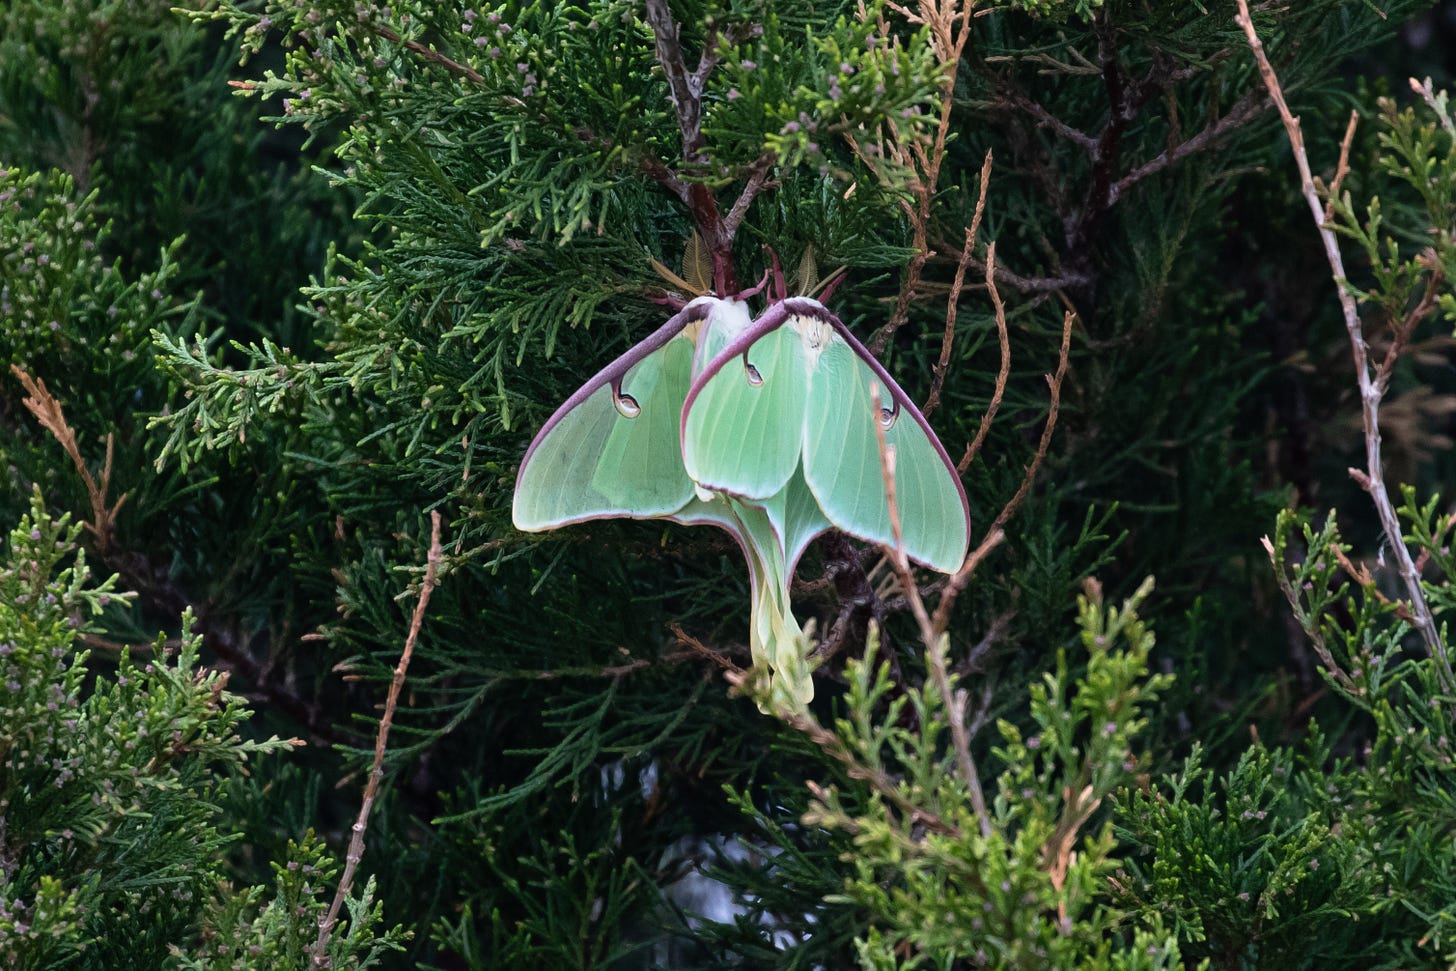 two mint-colored moths, triangle shaped with long tails, white bodies, red legs, and fluffy yellow antennae, holding onto a redcedar, one moth atop the other